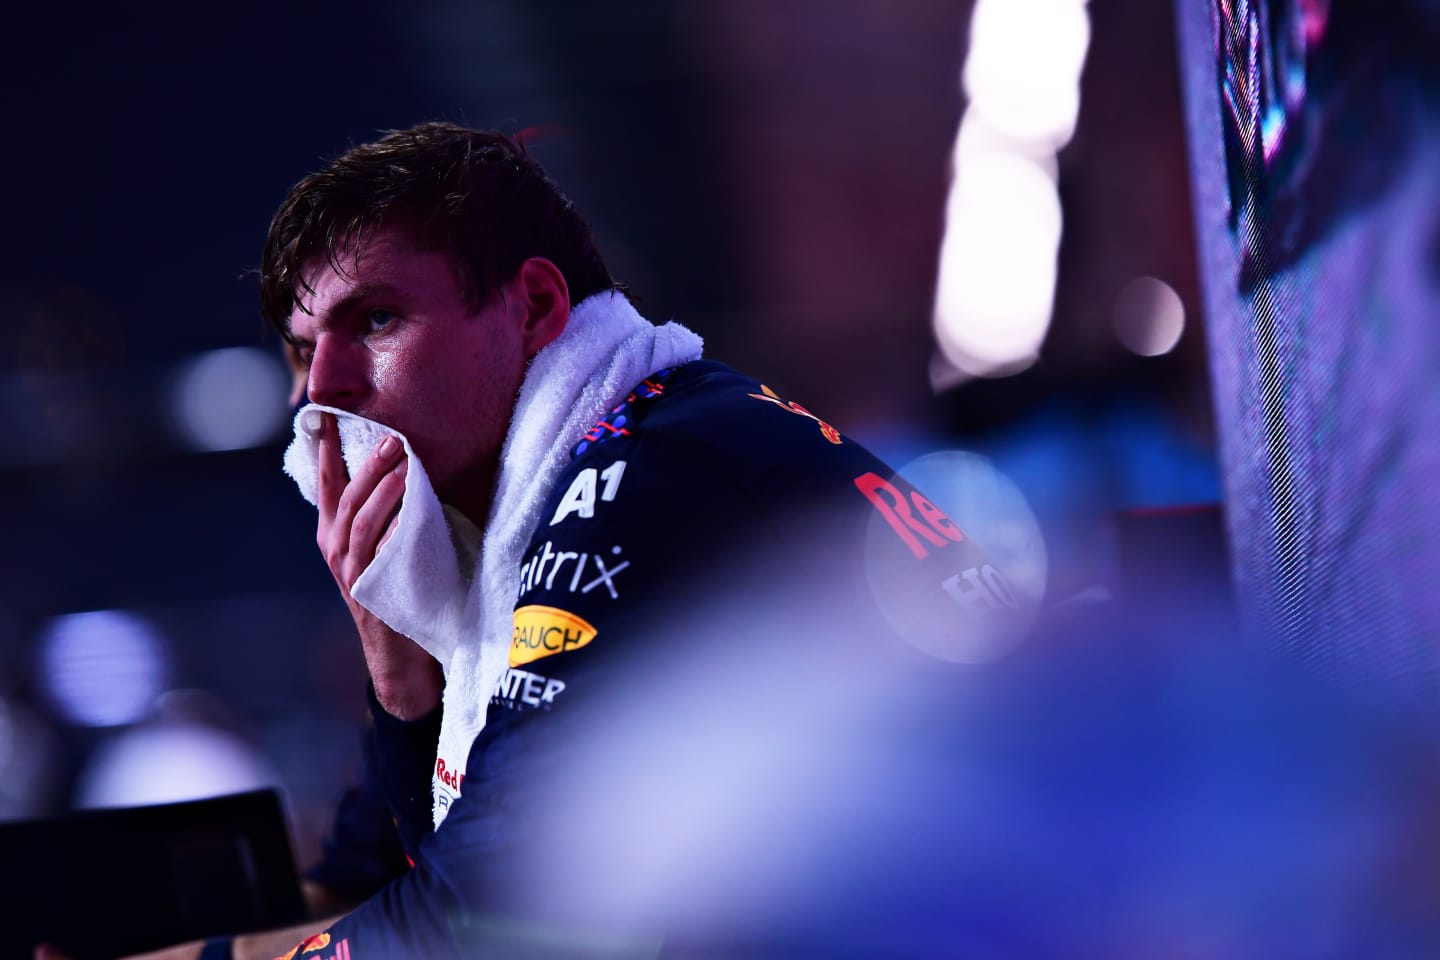 JEDDAH, SAUDI ARABIA - DECEMBER 05: Second placed Max Verstappen of Netherlands and Red Bull Racing